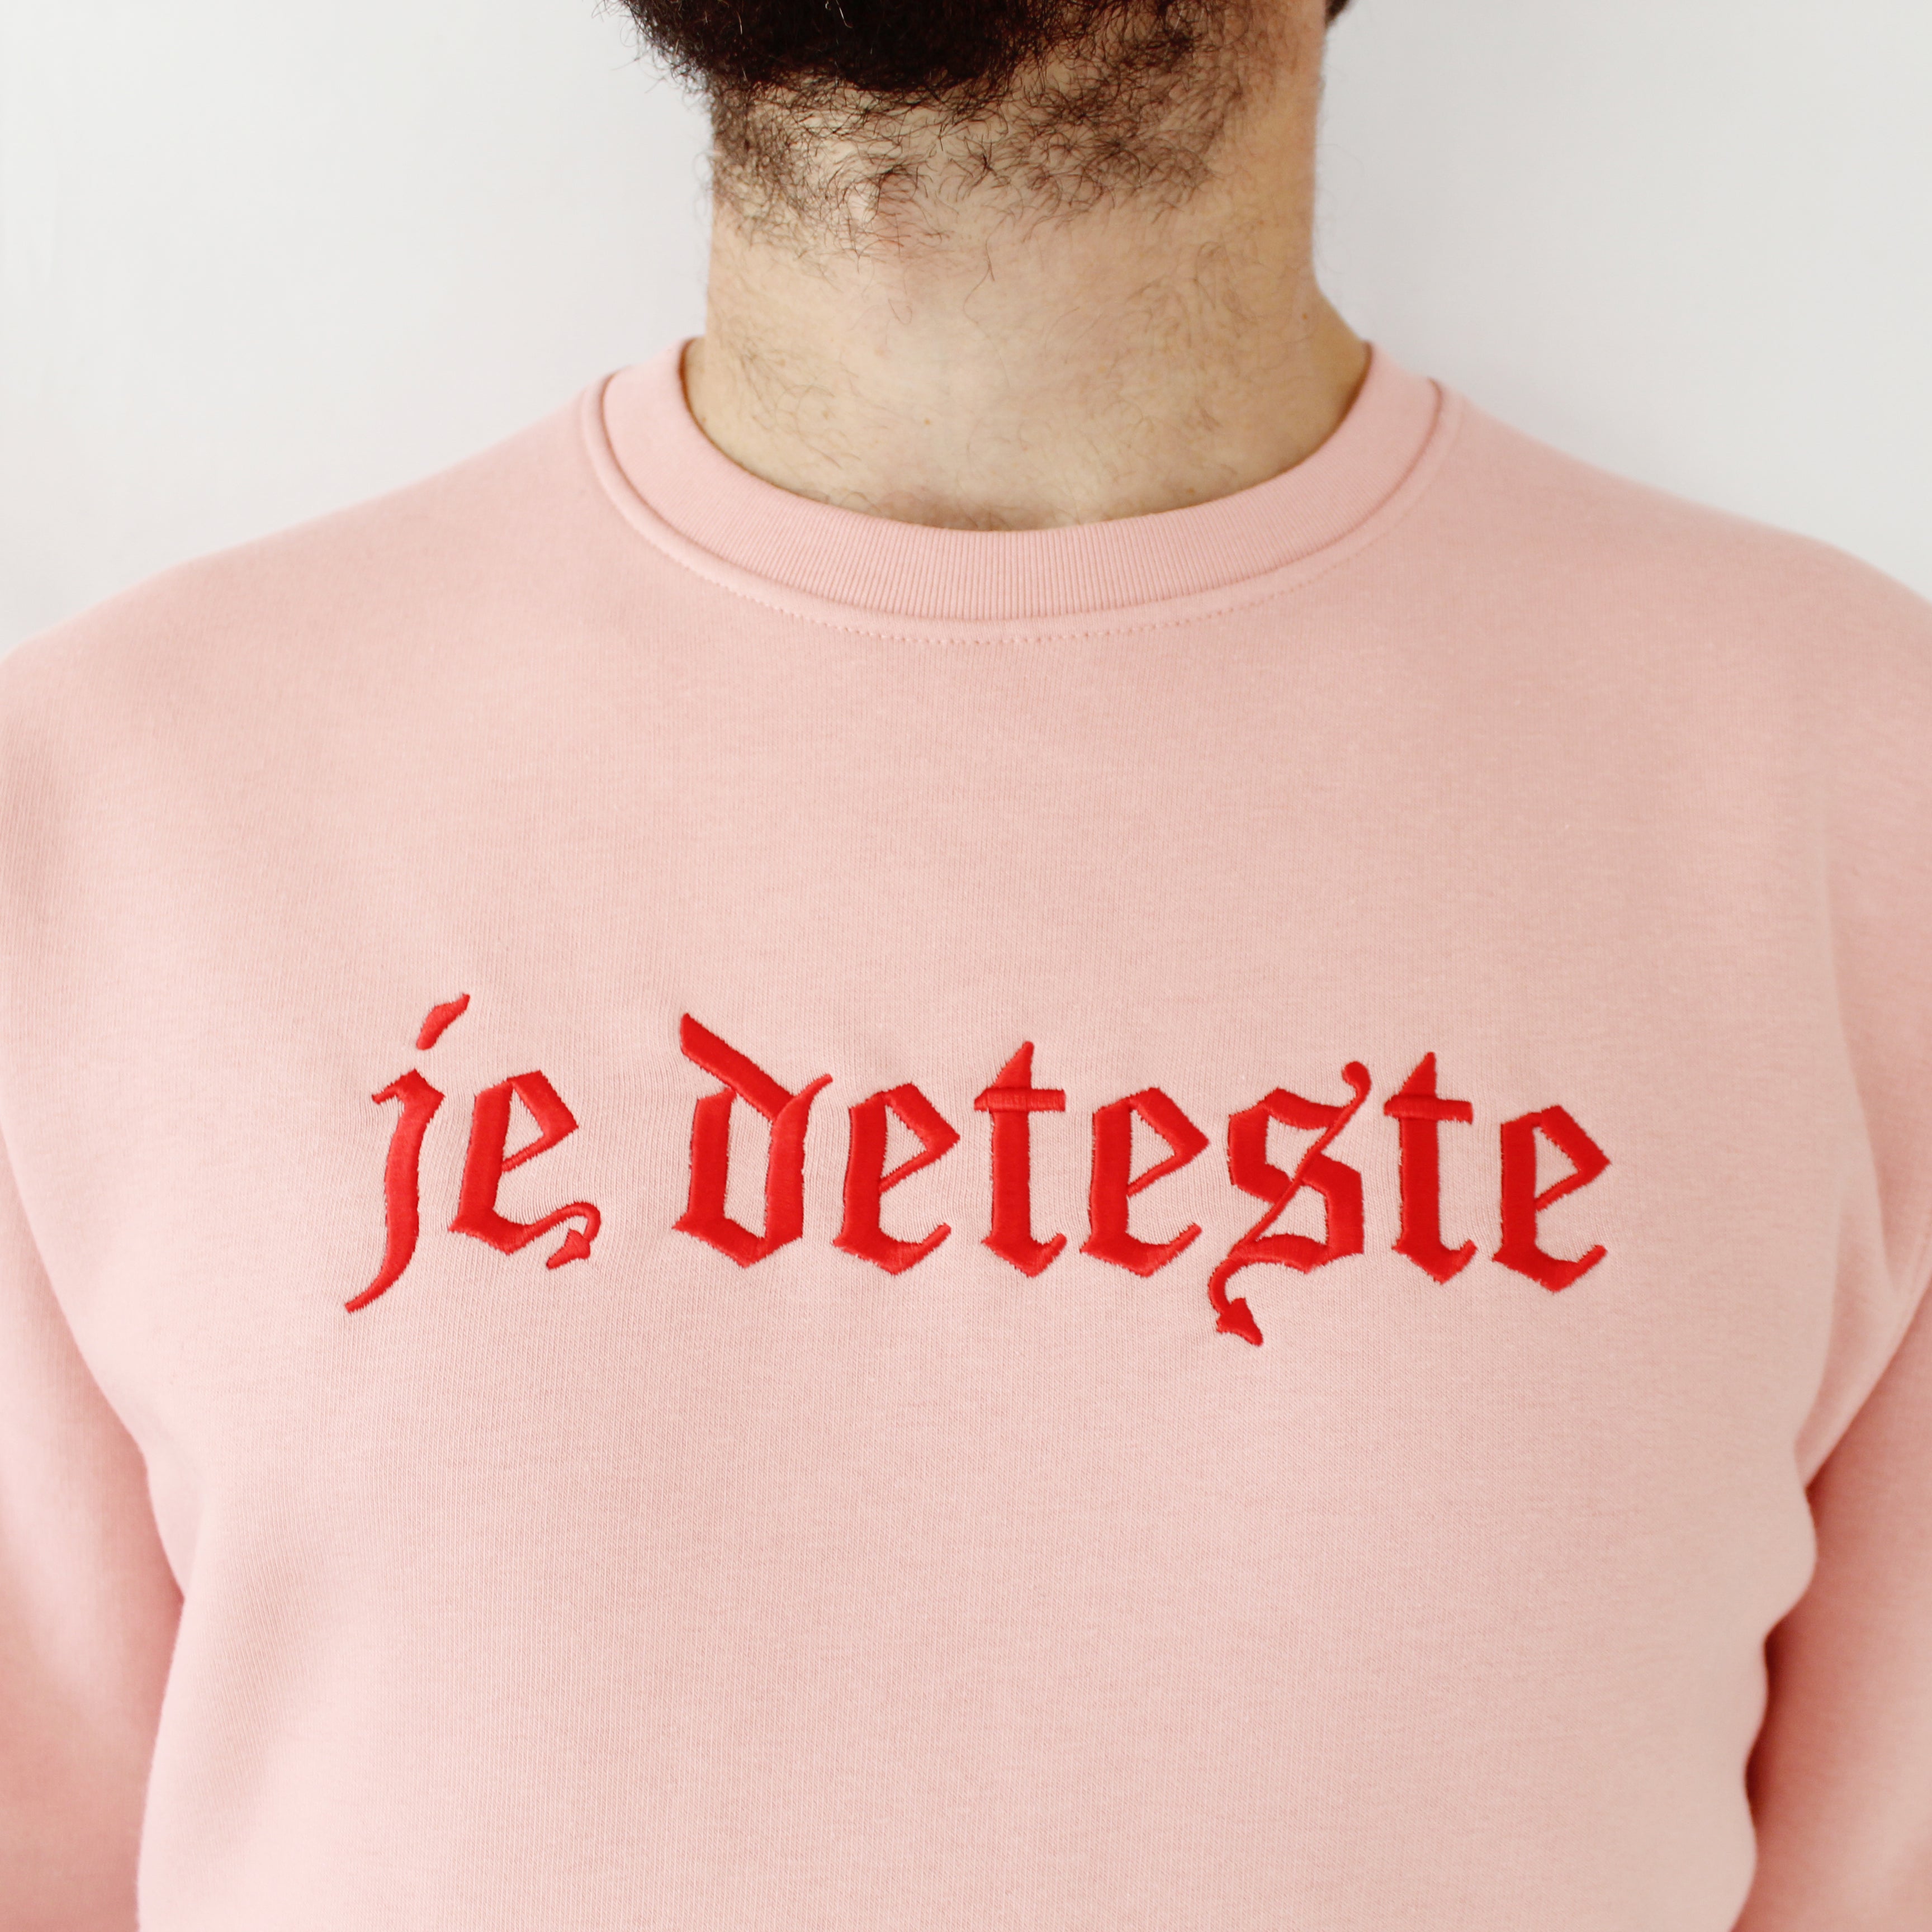 Je Deteste Embroidered Sweater Pink I Hate French Phrase Tattoo